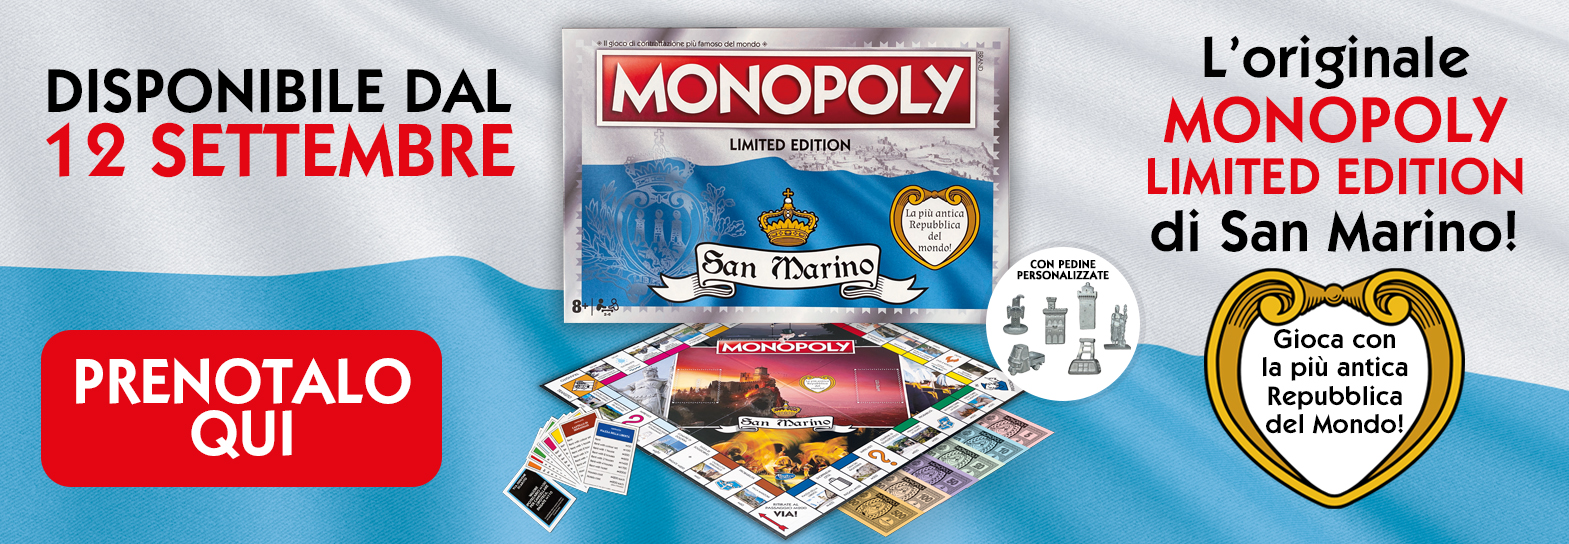 monopoly-banner-1